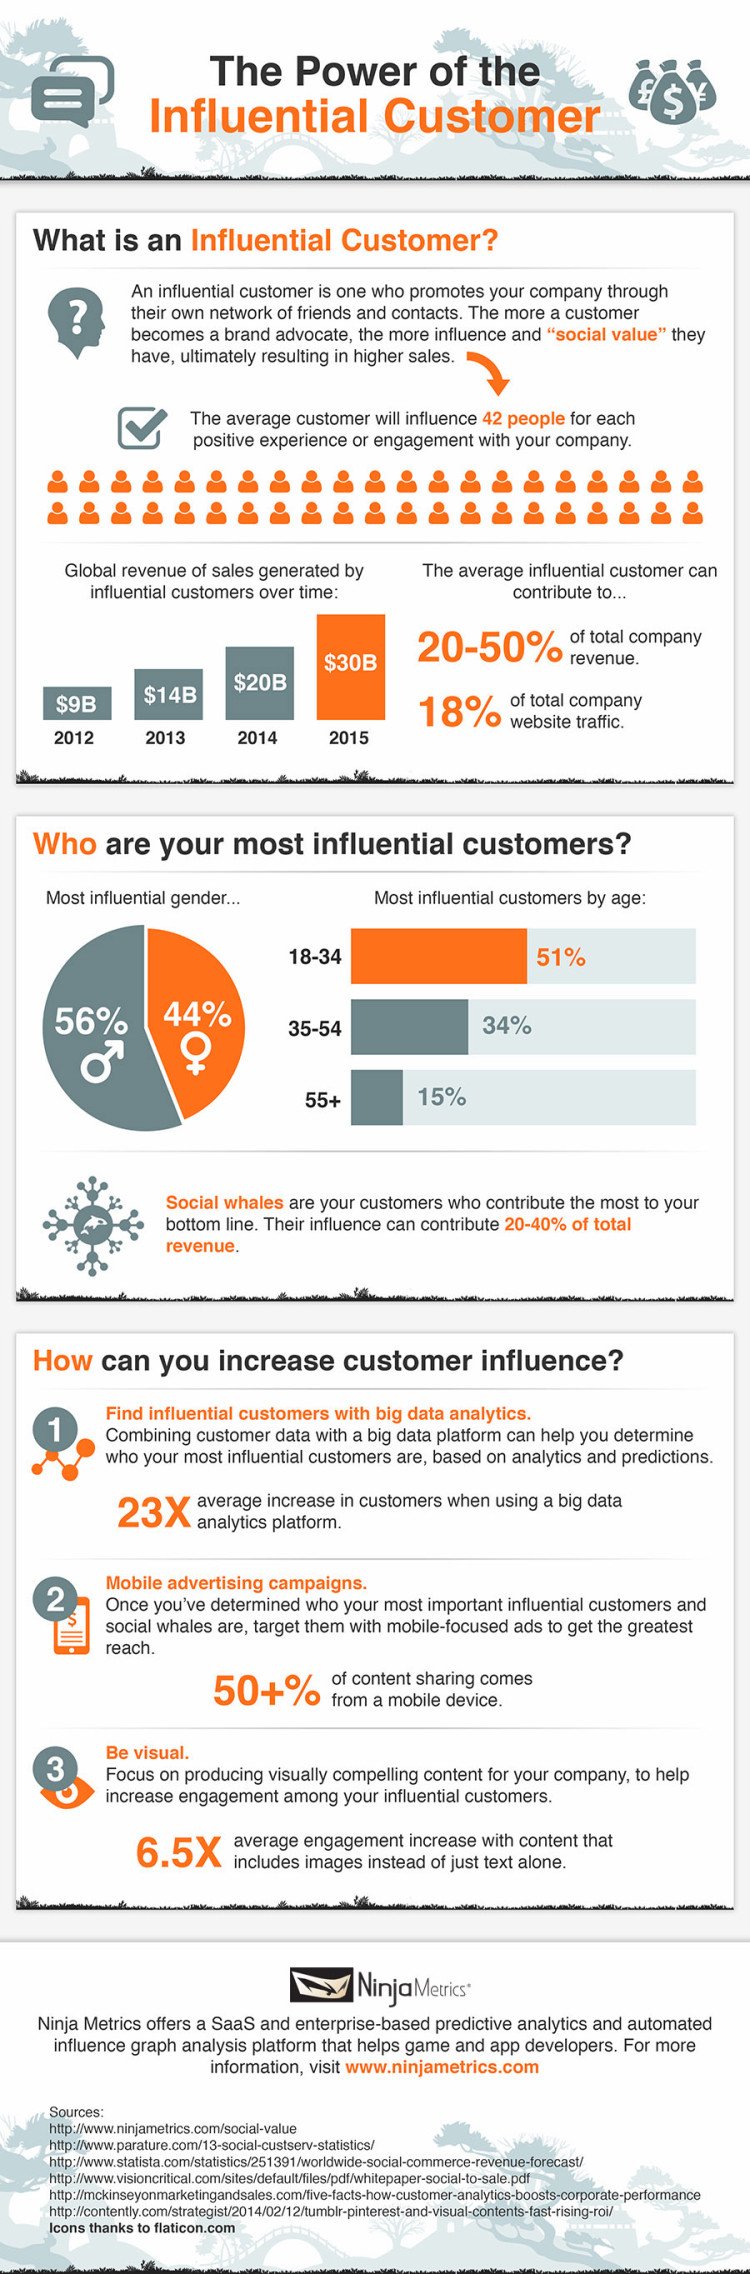 The Power of the Influential Customer [Infographic]